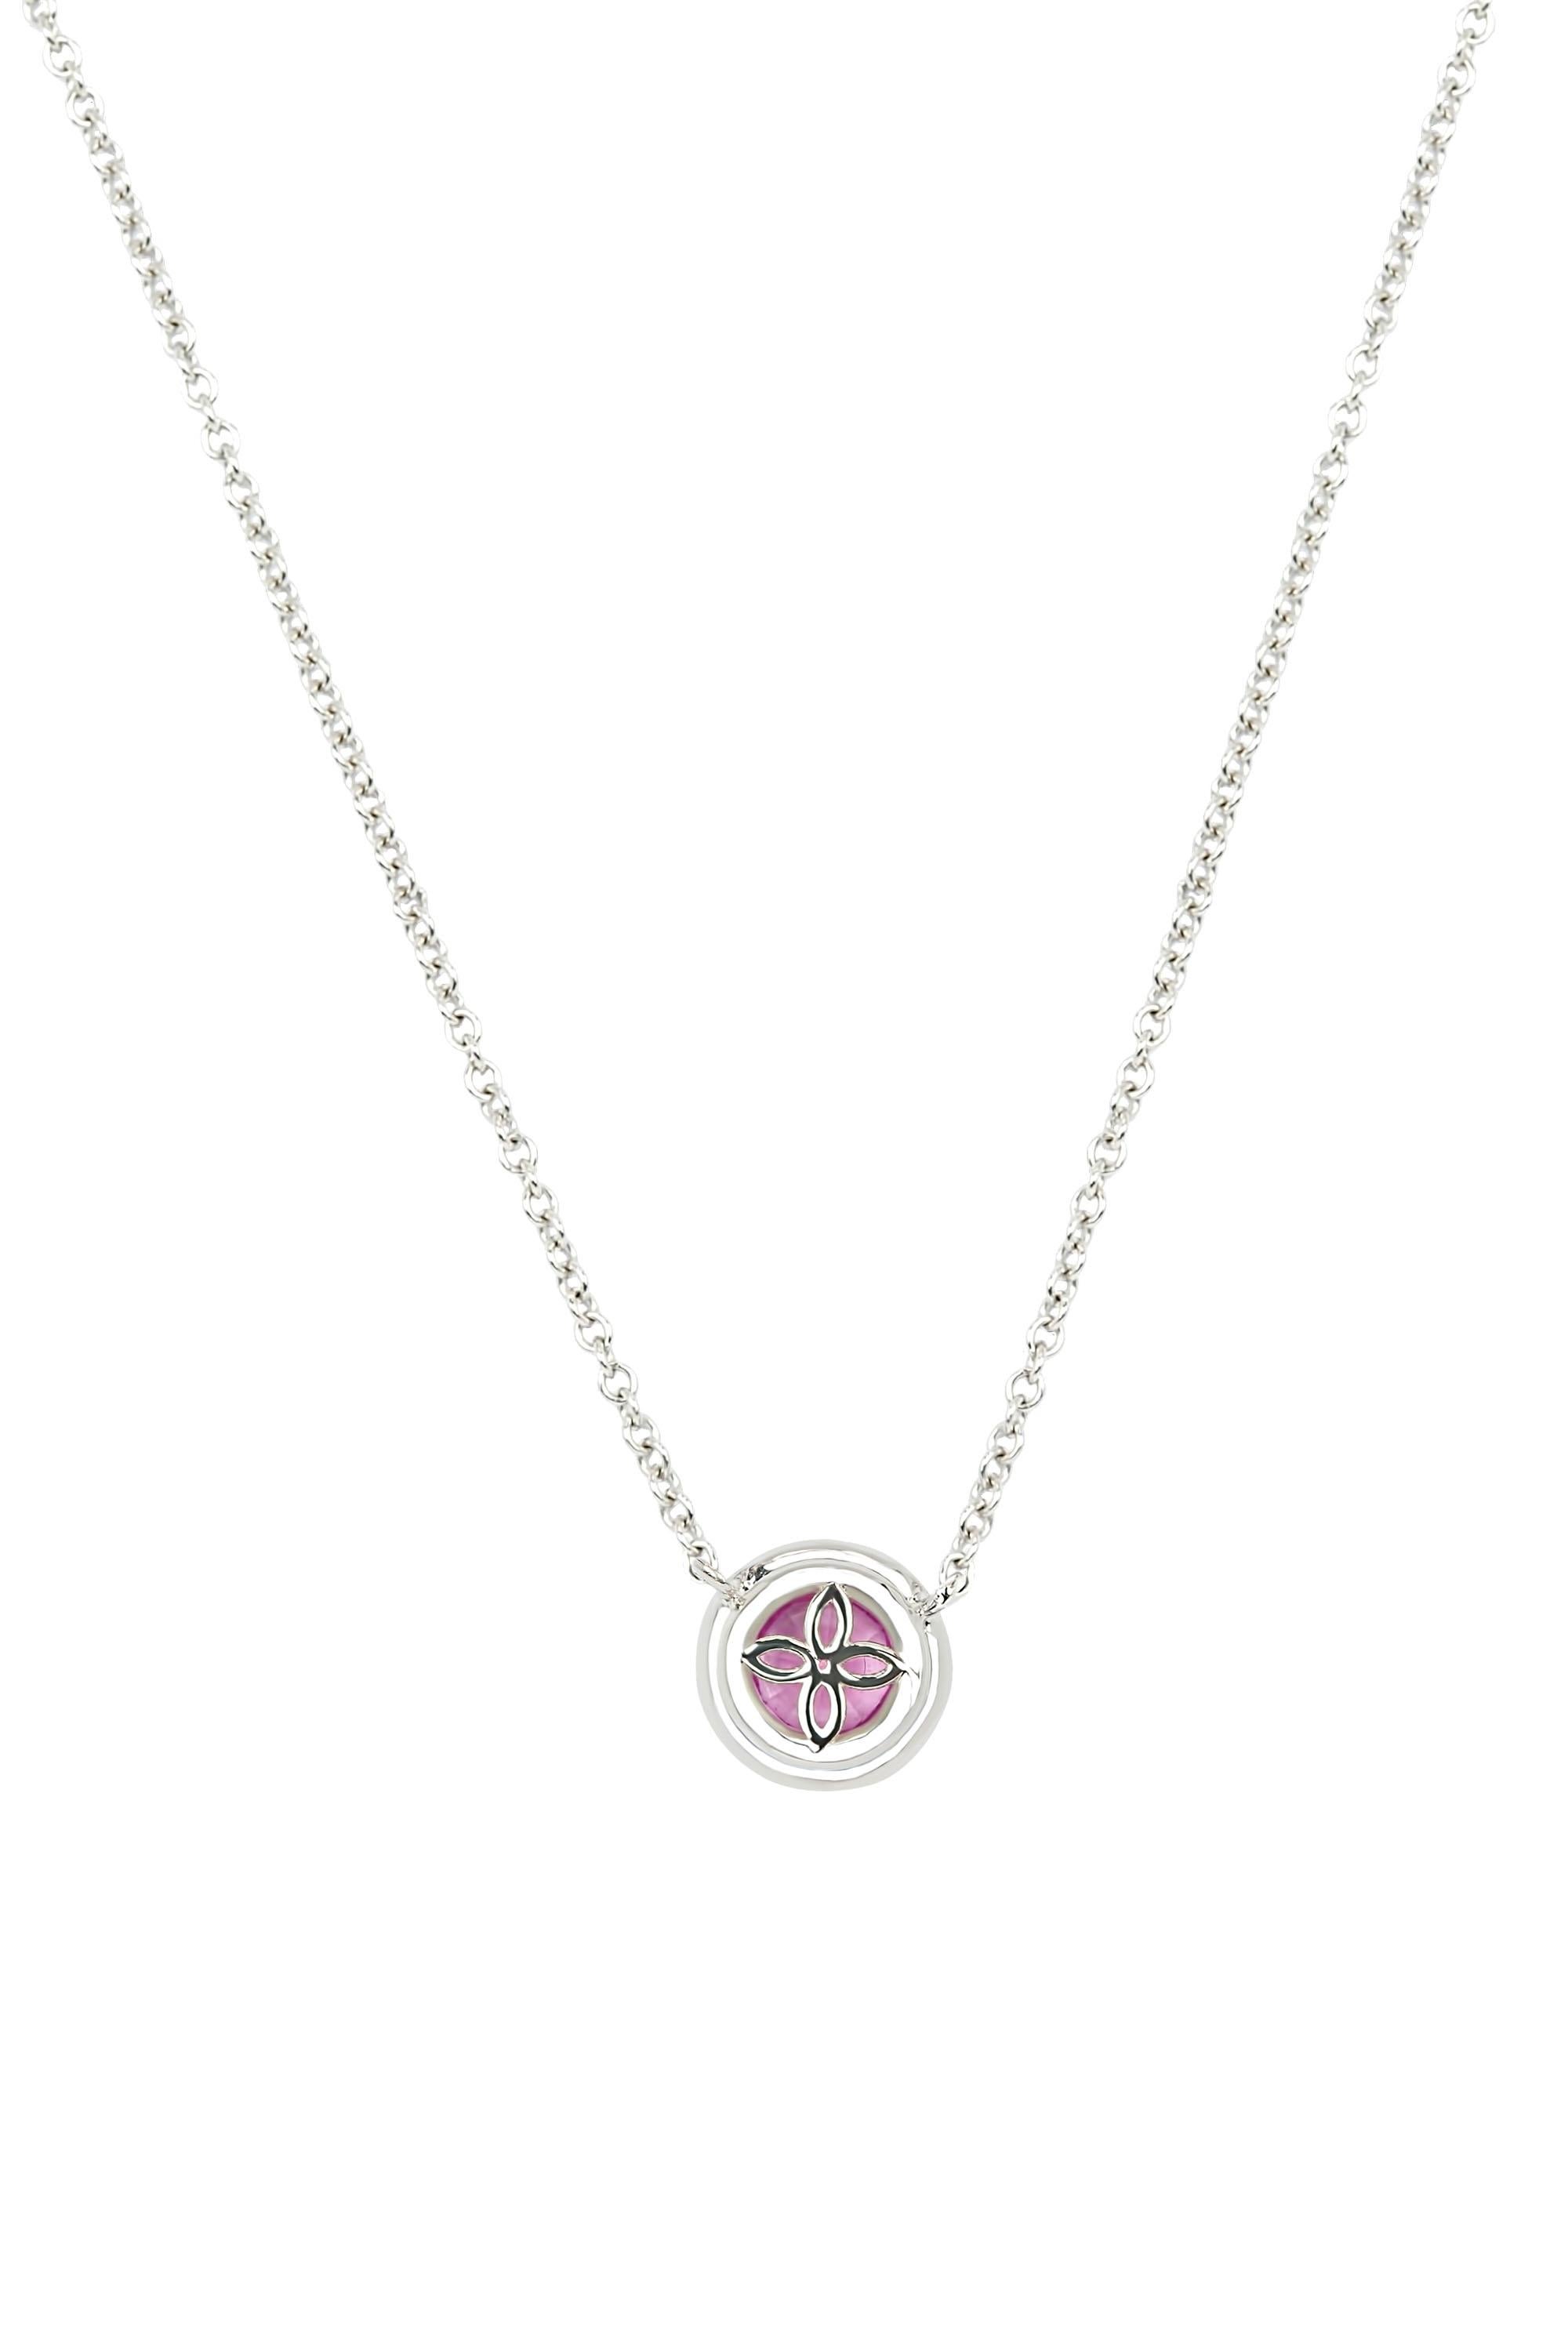 Fabricated in 18-karat white gold this cheerful and delicate necklace features a gracefully suspended bright pink sapphire of approximately 1.20 carats radiating within a frame of round brilliant diamonds. Beautifully detailed and finished. Total